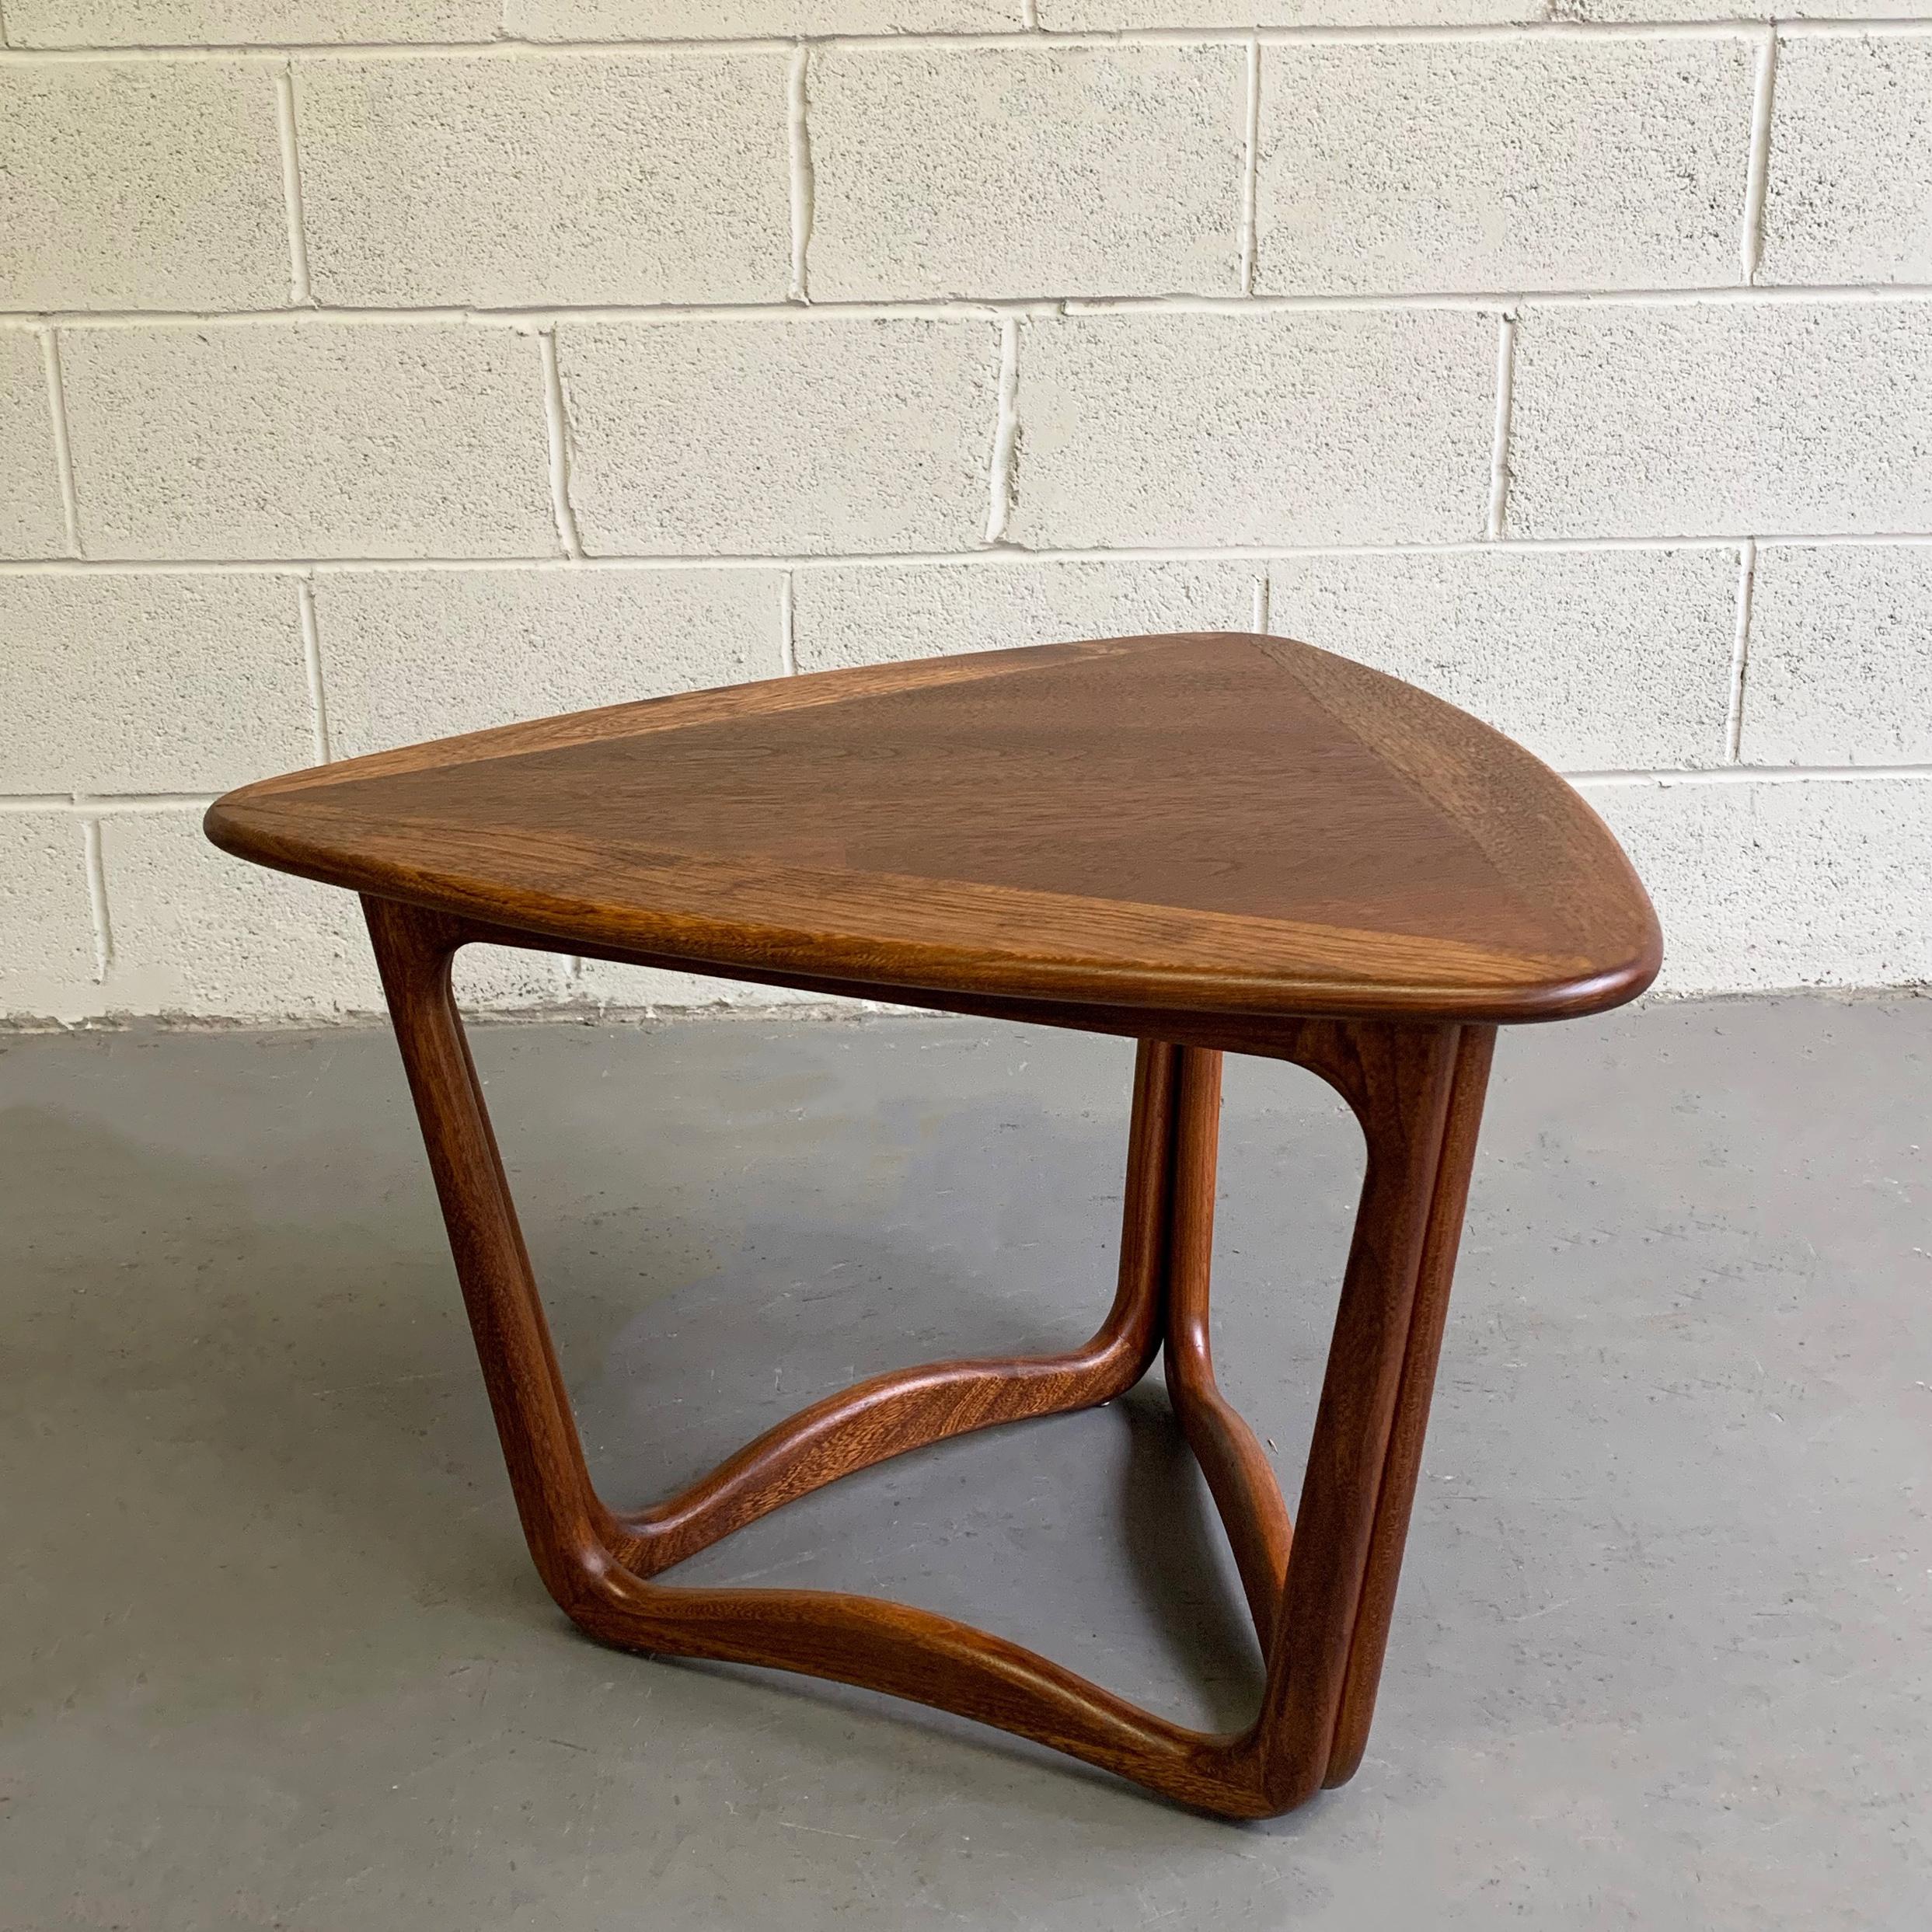 Mid-Century Modern, walnut, side or coffee table by Lane Alta Vista features a two-toned, triangular 